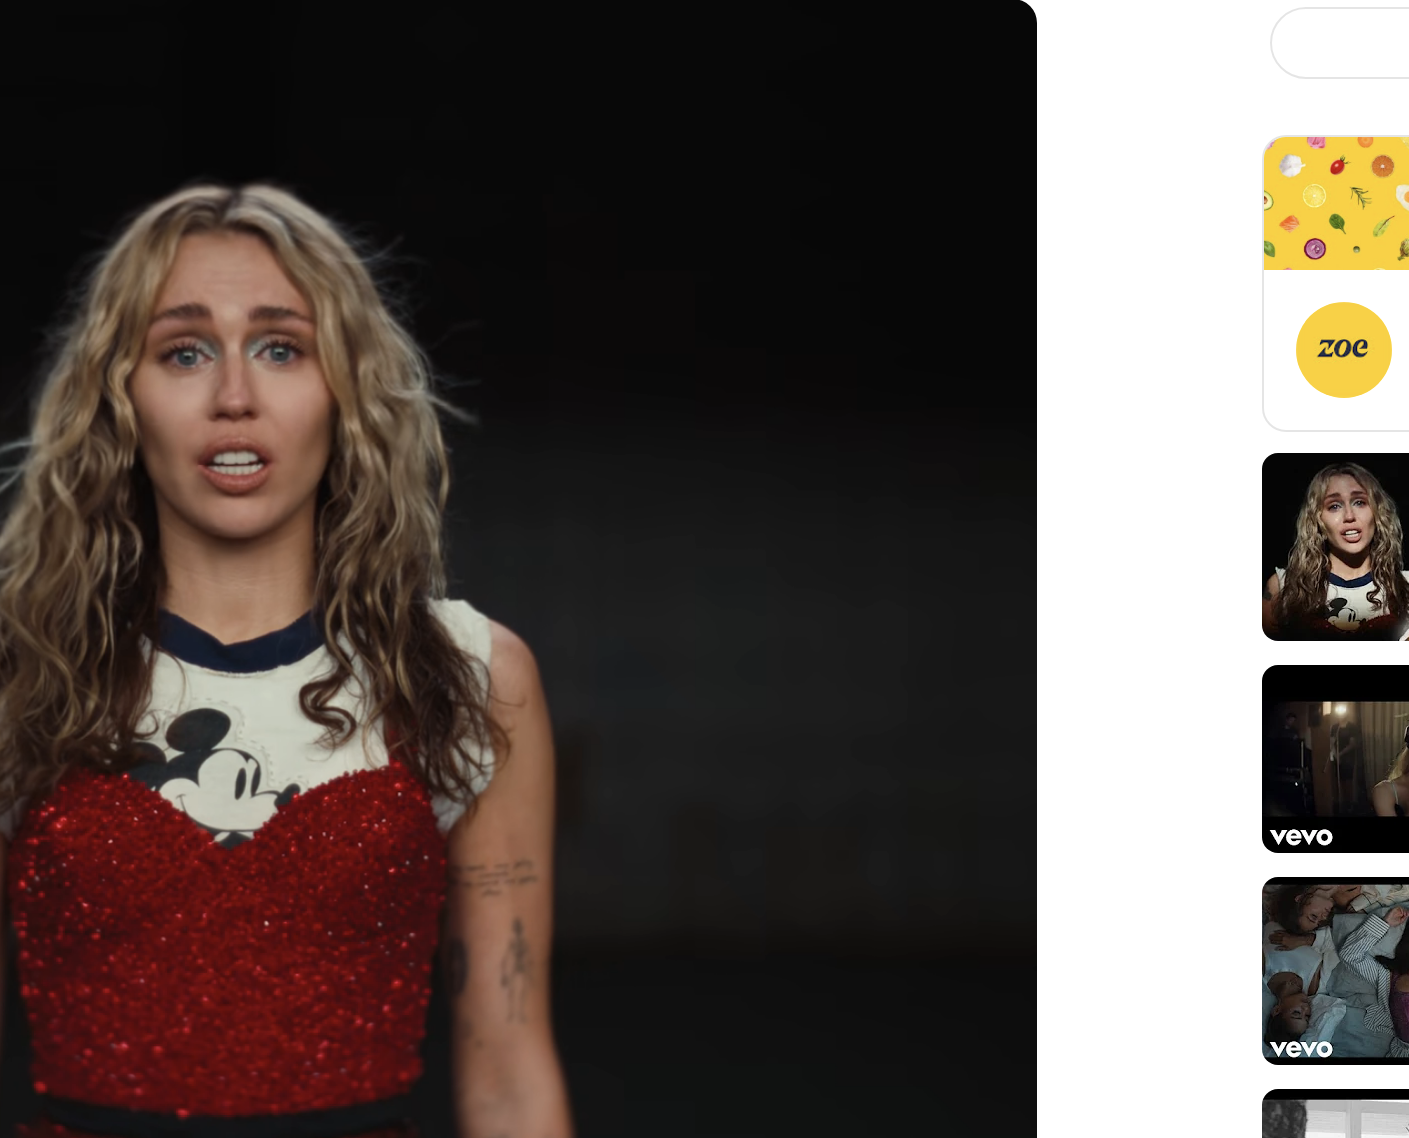 Close-up of Miley from the video, in a sparkly outfit and Mickey Mouse T-shirt